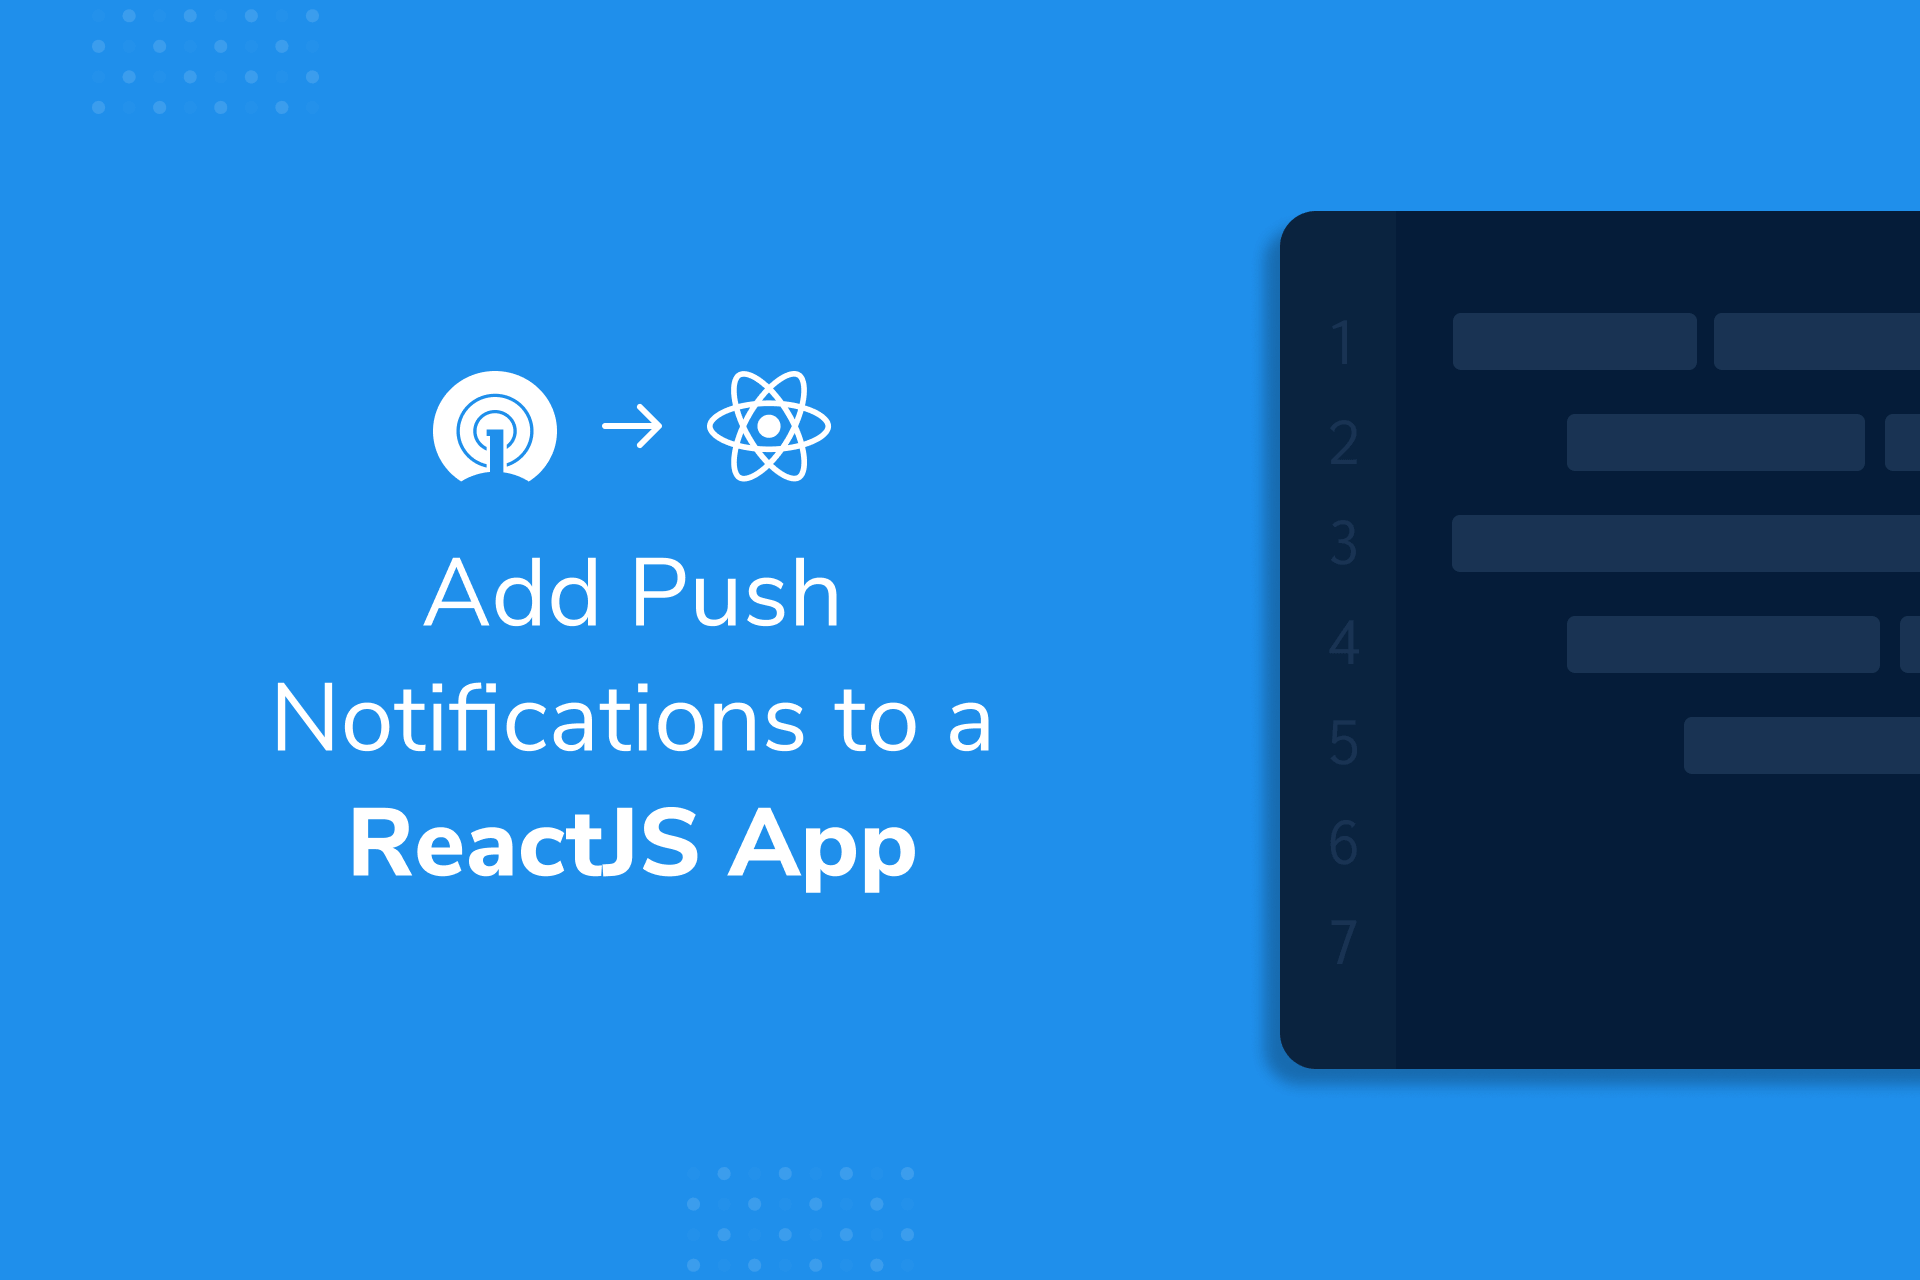 Developer Guide: How to Add Push Notifications into a ReactJS App